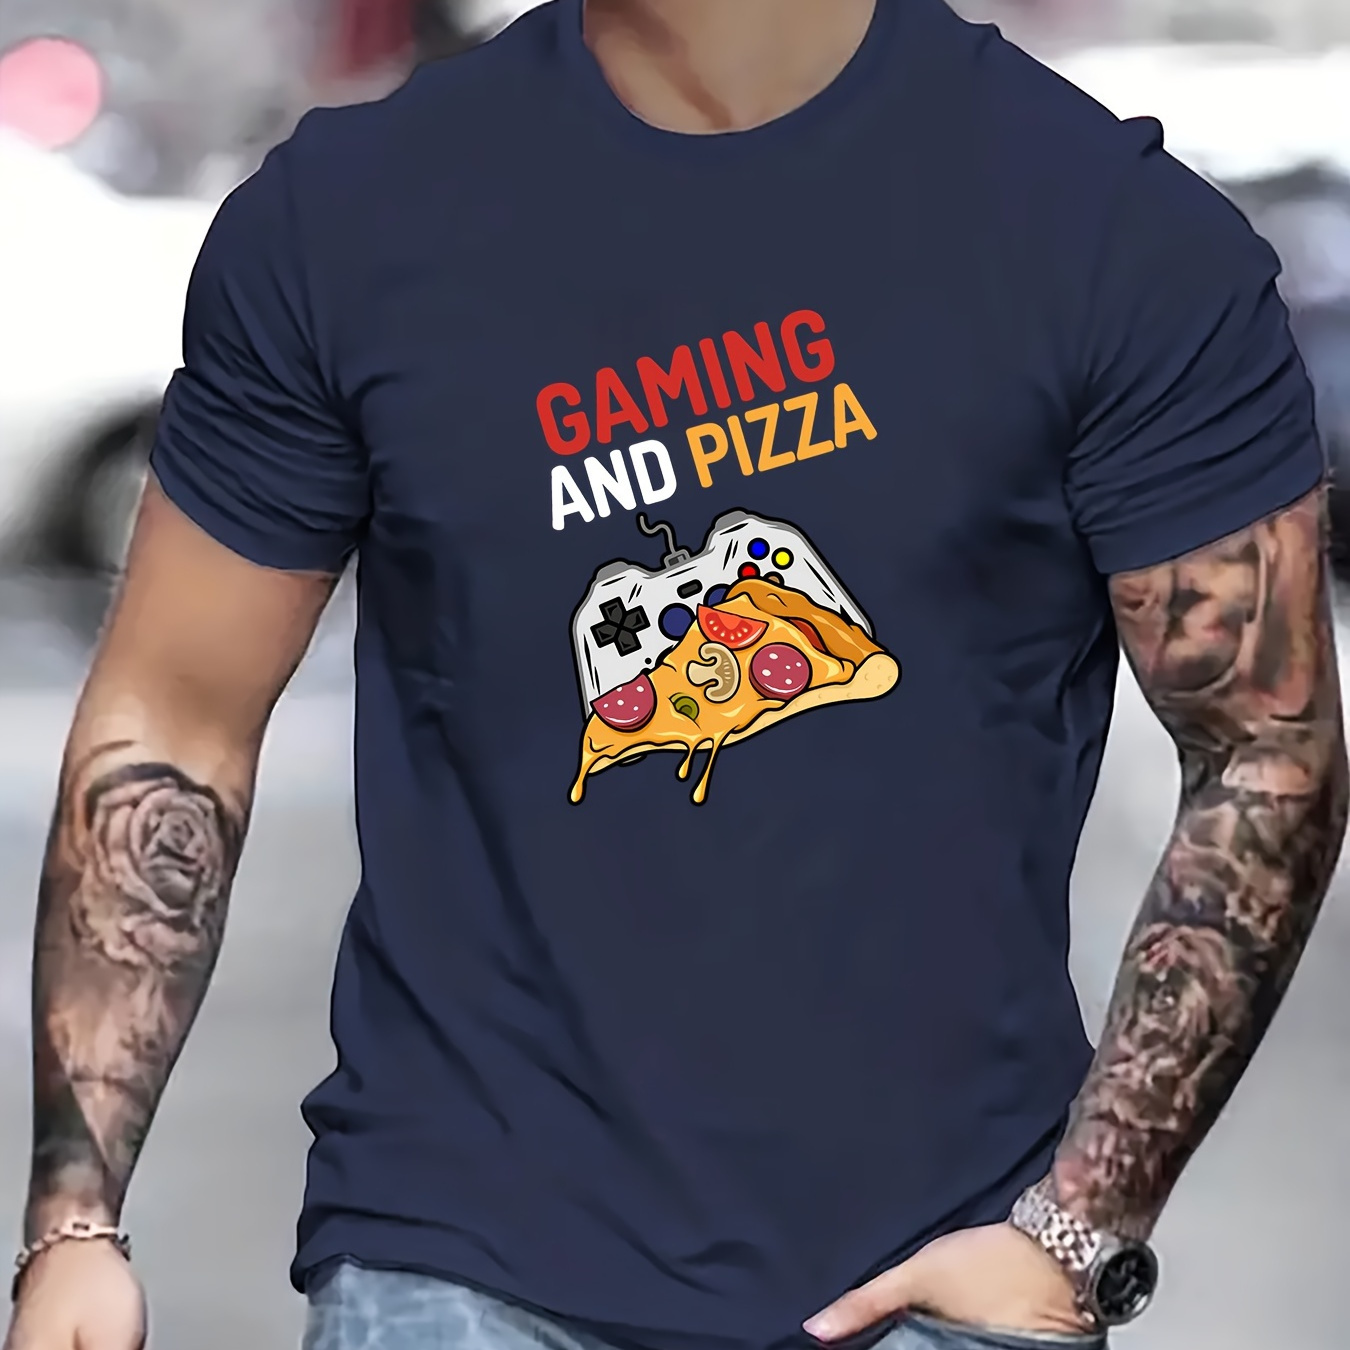 

Gaming And Pizza Print T Shirt, Tees For Men, Casual Short Sleeve T-shirt For Summer